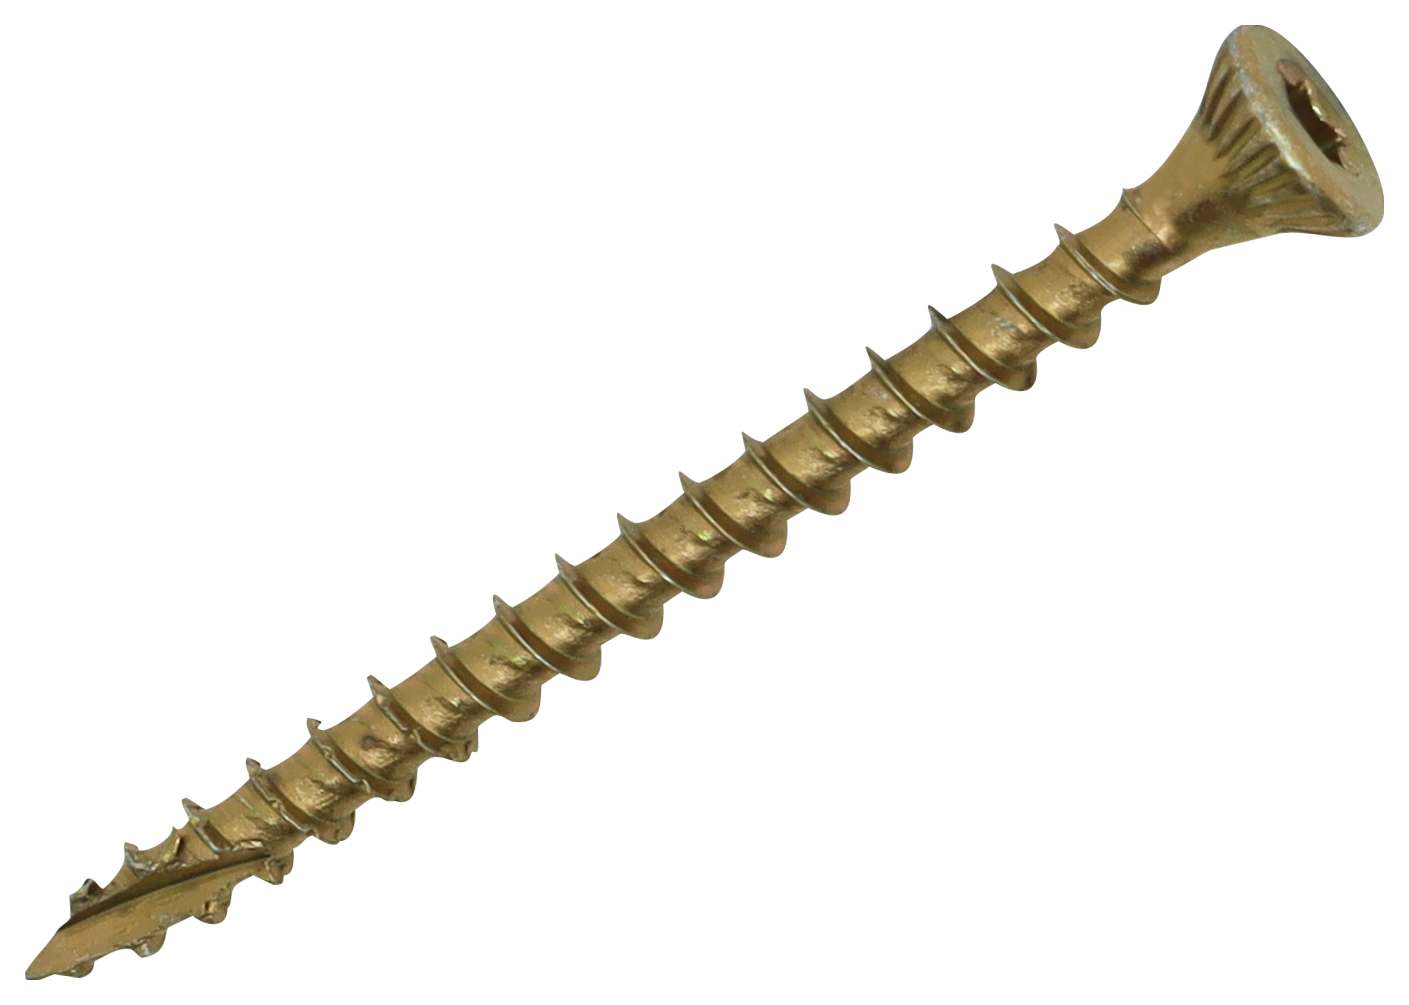 Optimaxx TX Countersunk Passivated Wood Screw - 4 x 50mm - Pack of 200